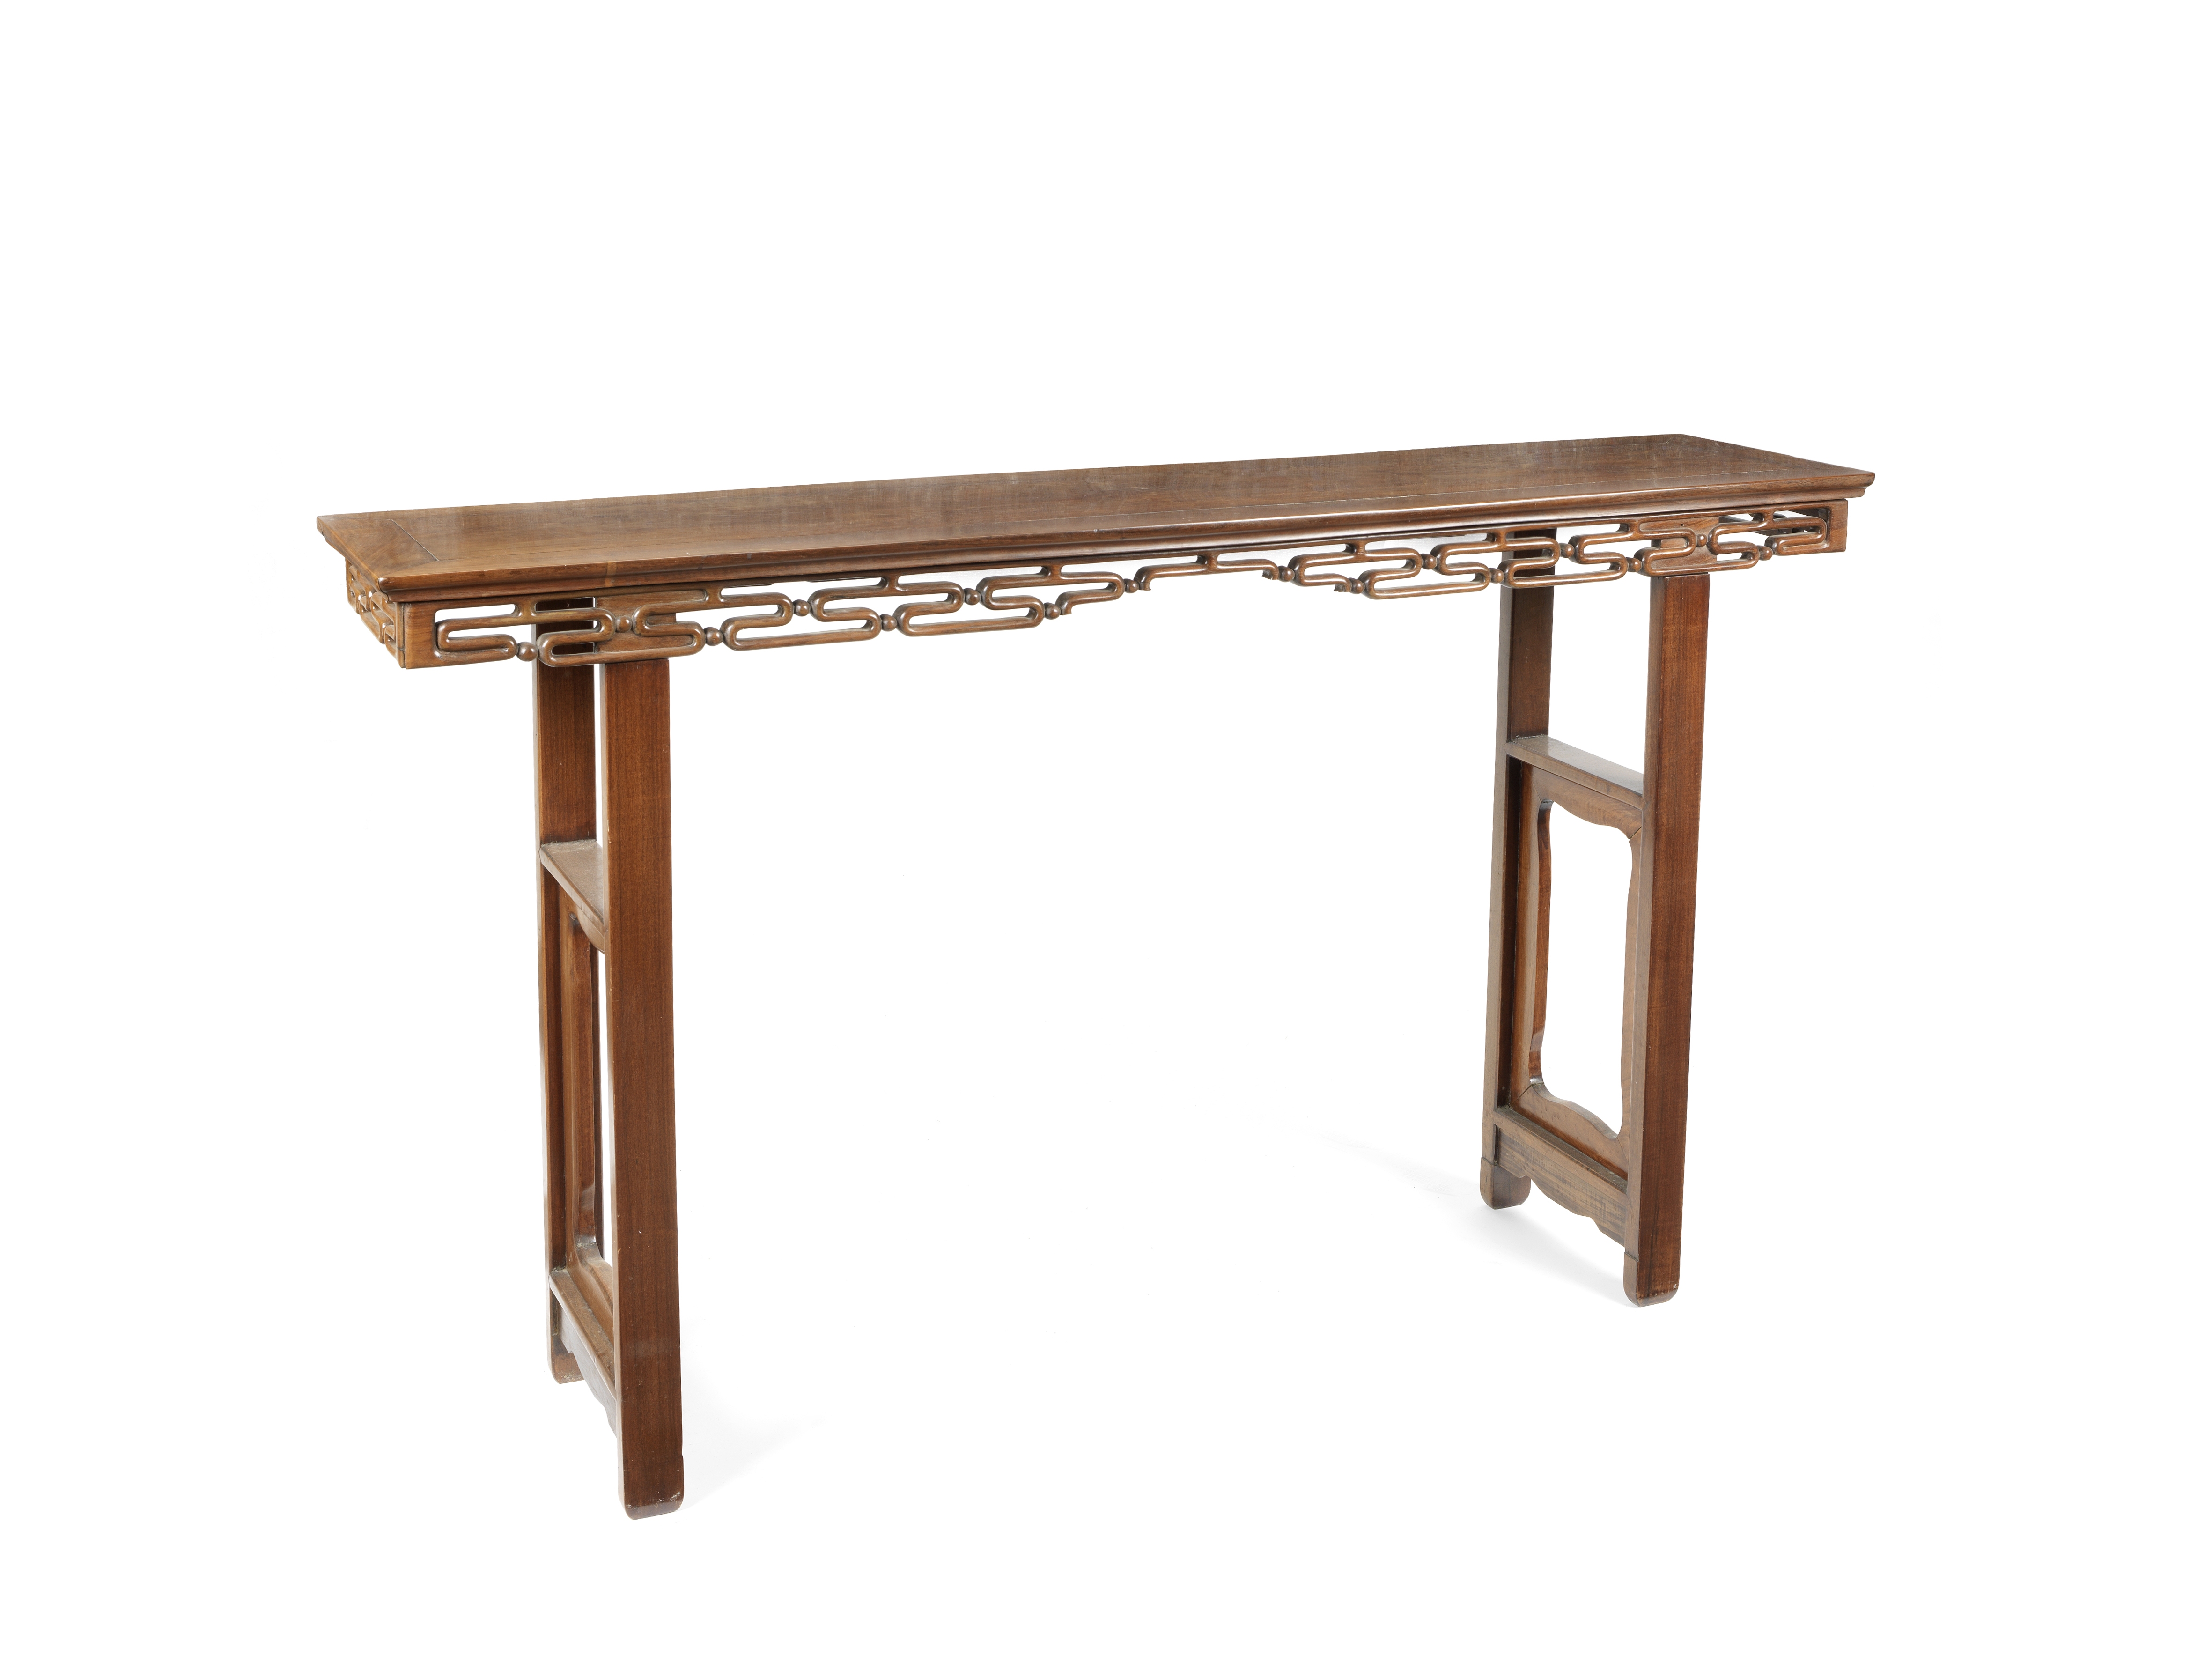 A hardwood recessed-leg table, pingtou an 19th/20th century